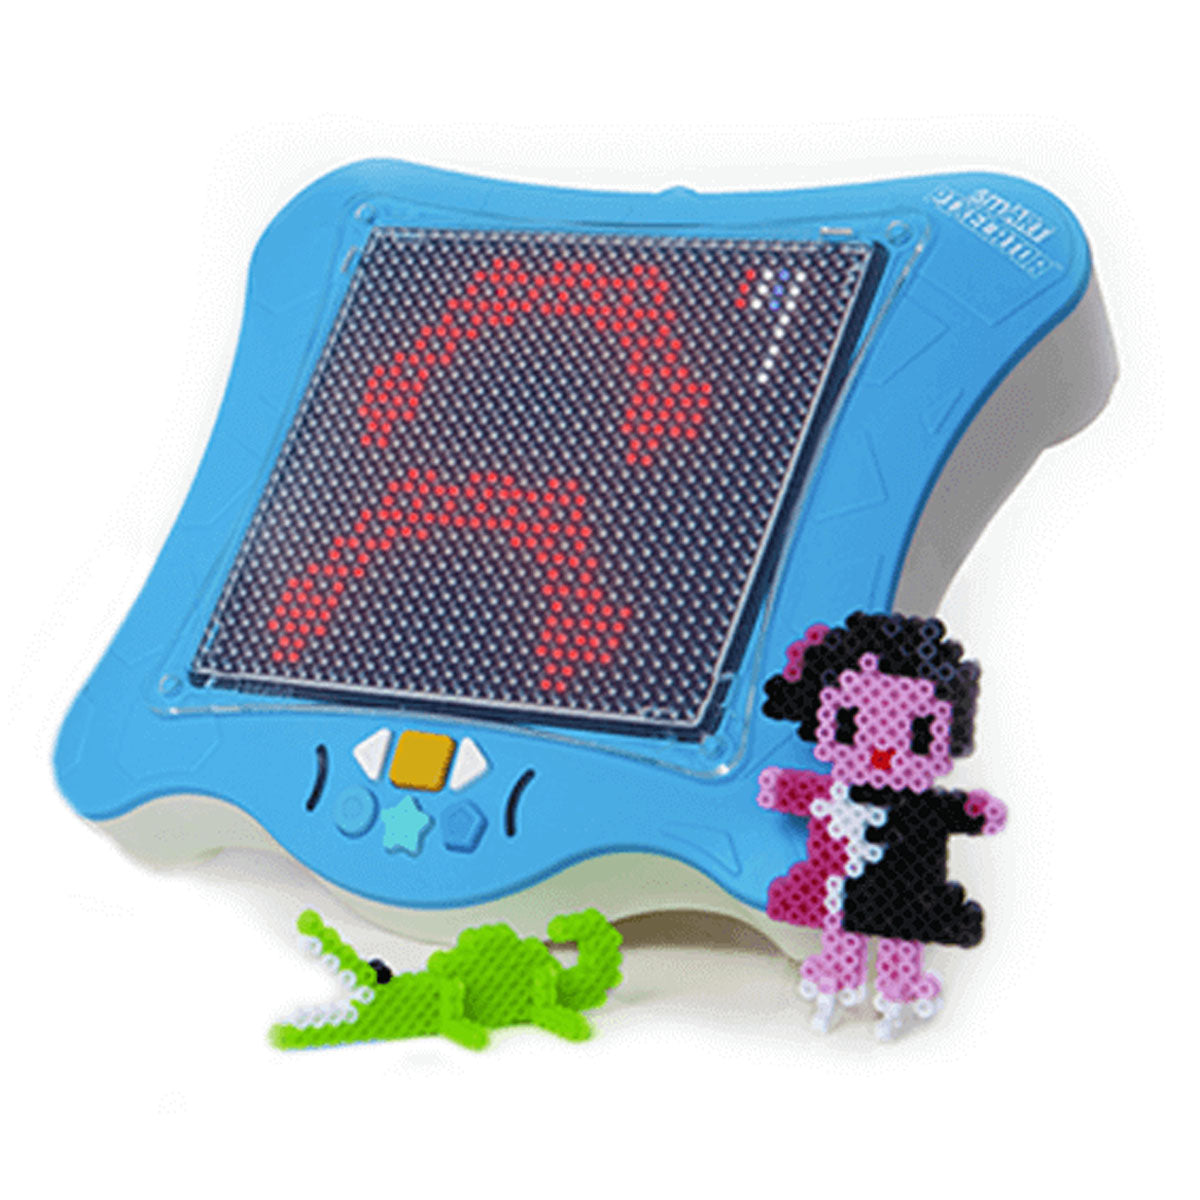 Flycatcher Toys - Need more smART Pixel Beads for BIG projects? No problem!  GET IT HERE:  #smartpixelator #toy #innovative  #kidsloveit #learning